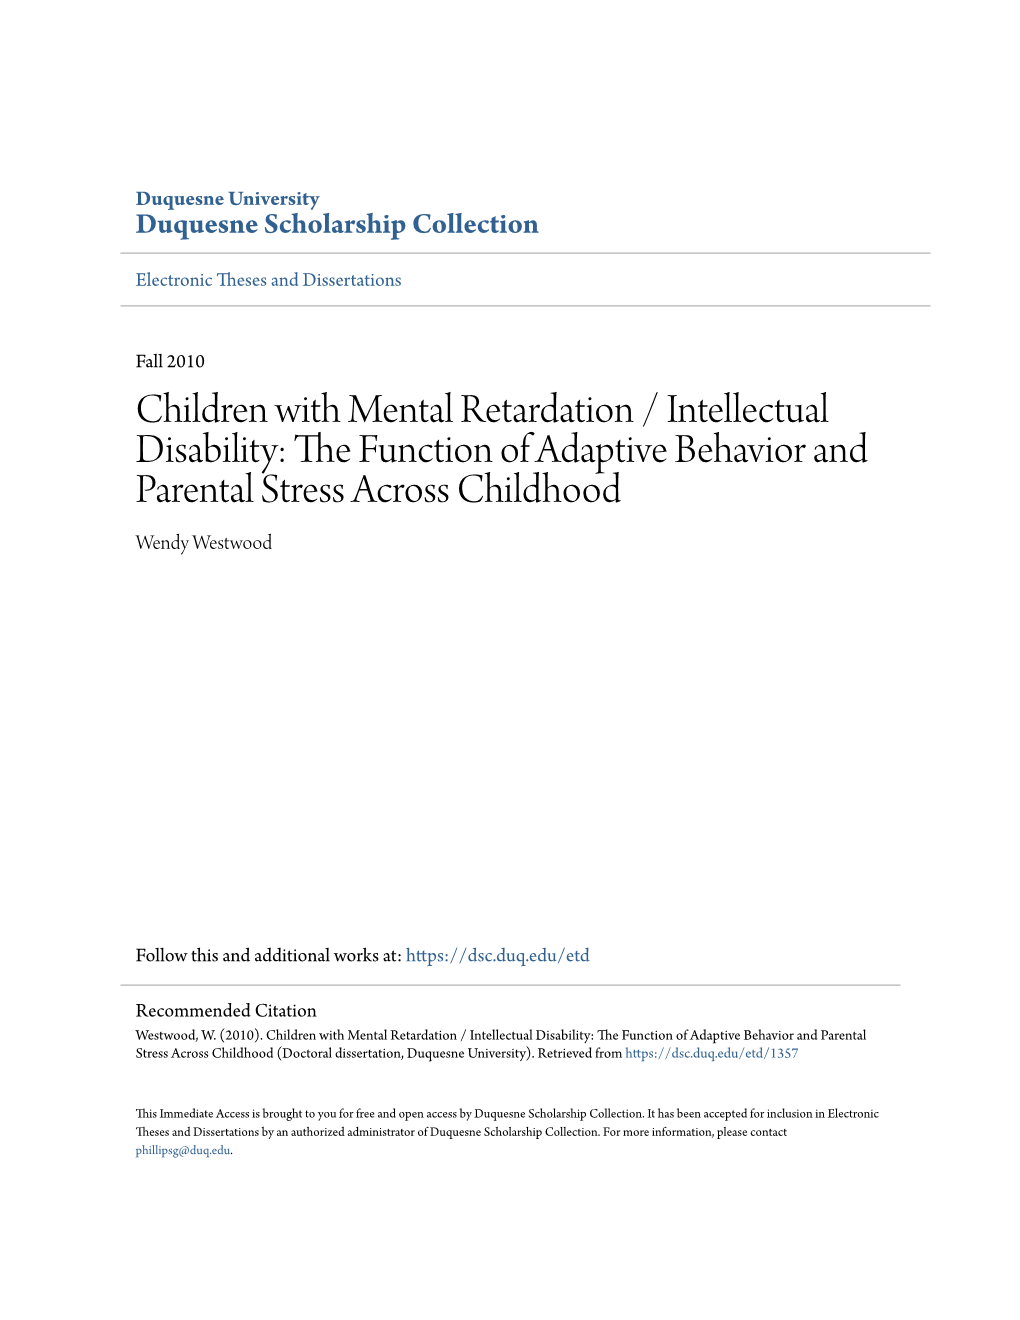 Children with Mental Retardation / Intellectual Disability: the Uncf Tion of Adaptive Behavior and Parental Stress Across Childhood Wendy Westwood